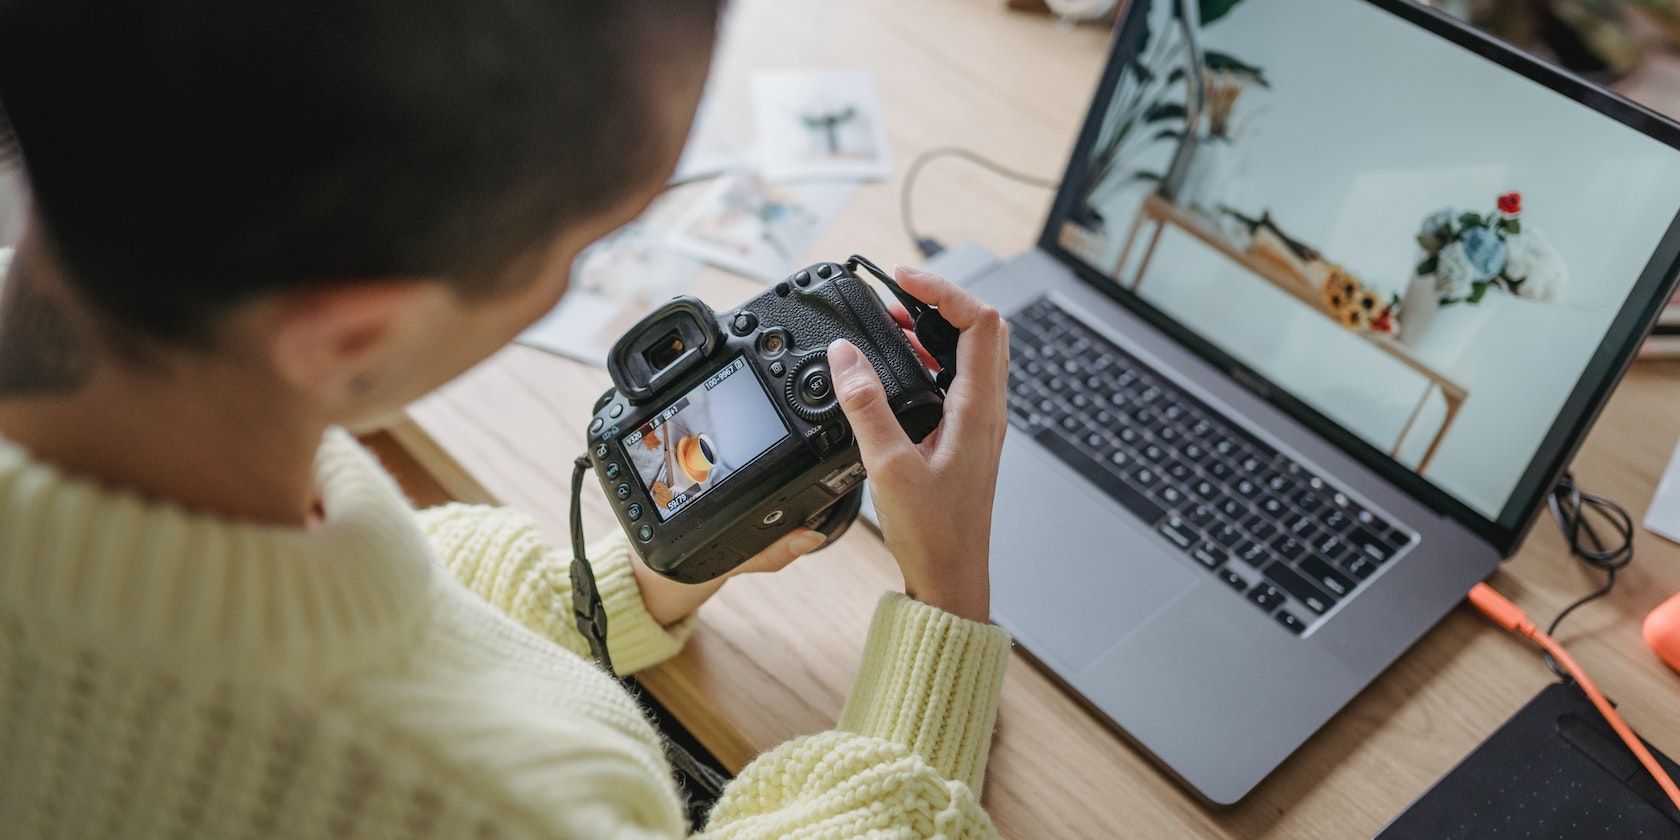 Photographer Viewing Photos on Camera and Laptop